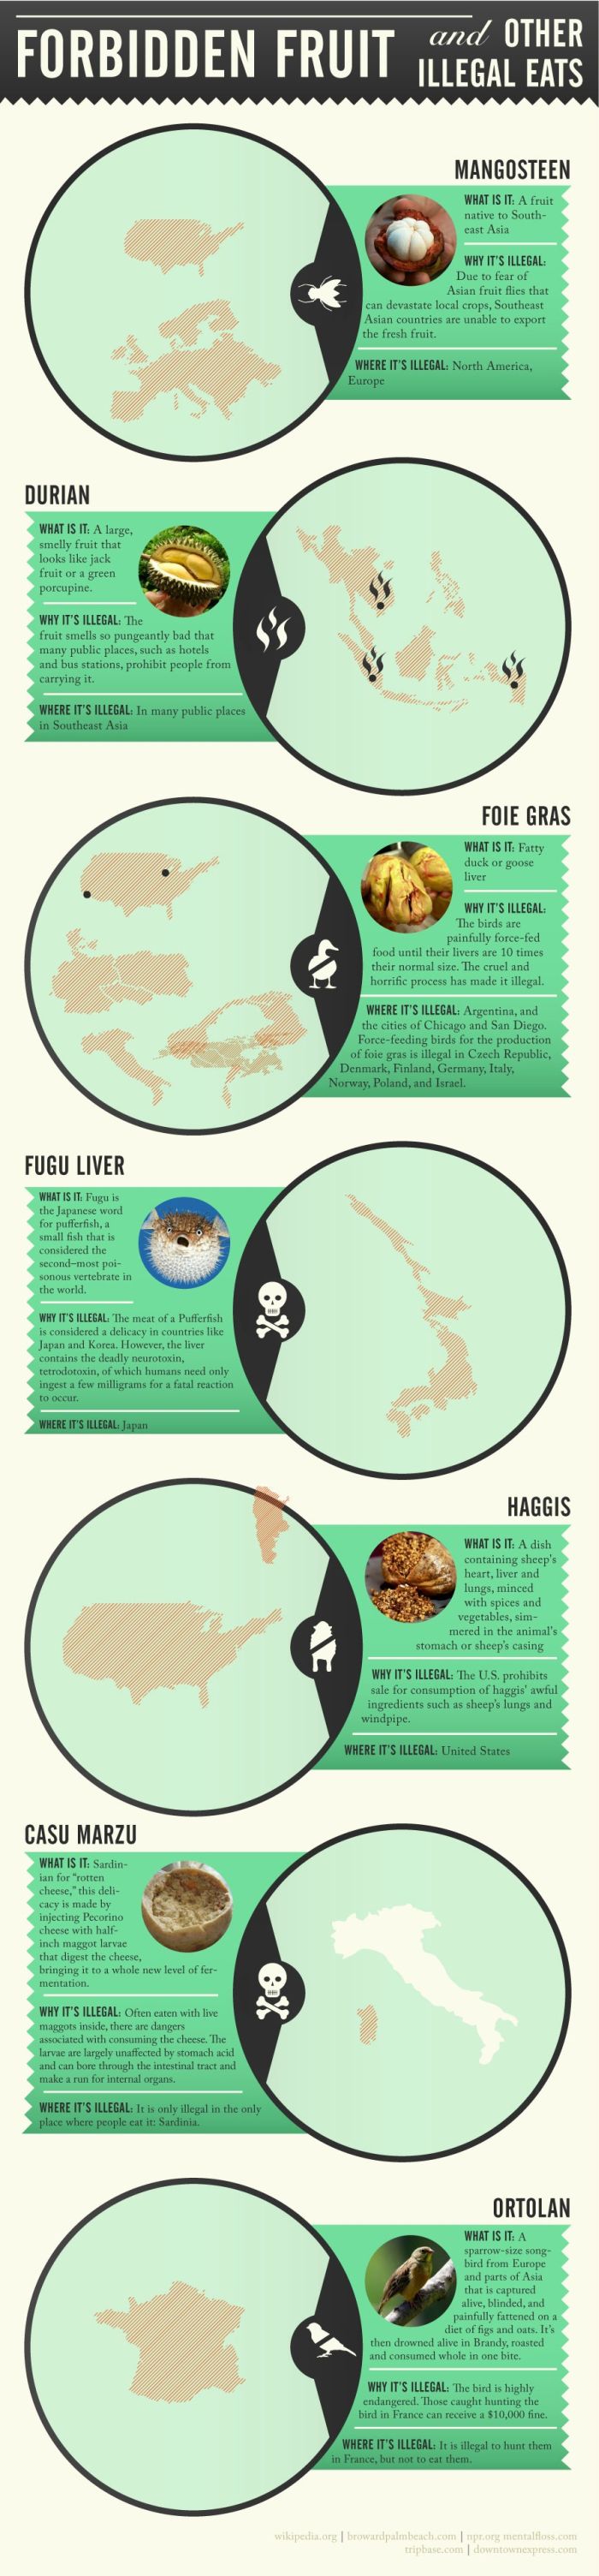 Forbidden Fruit & Other Illegal Foods (infographic)